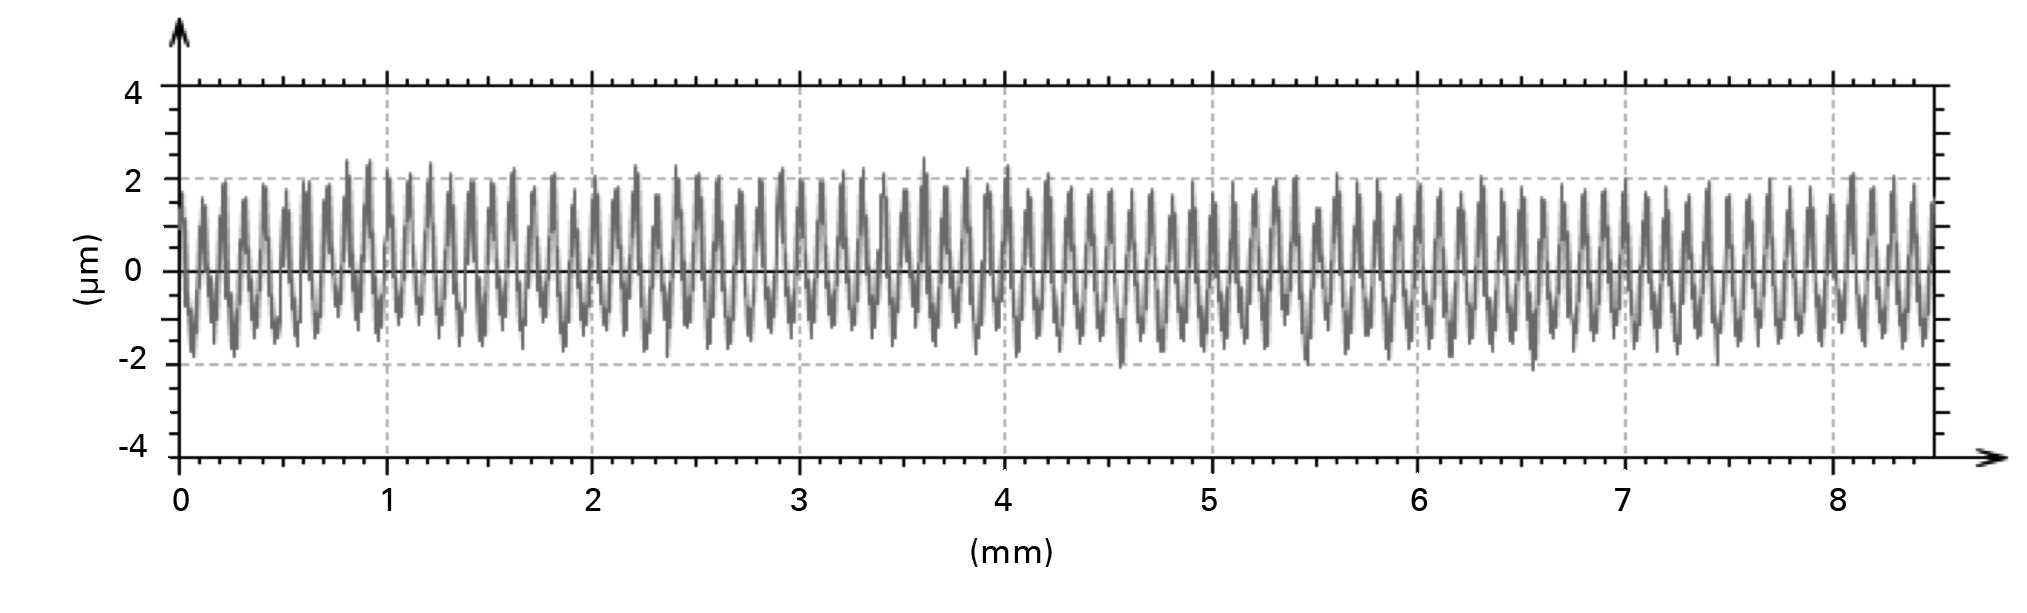 Figs. 6a - 6b 
            Example of a typical scan trace
taken using the diamond probe on the roundness measuring machine from
(a) the OptiStem trunnion and (b) the Exeter trunnion.
          